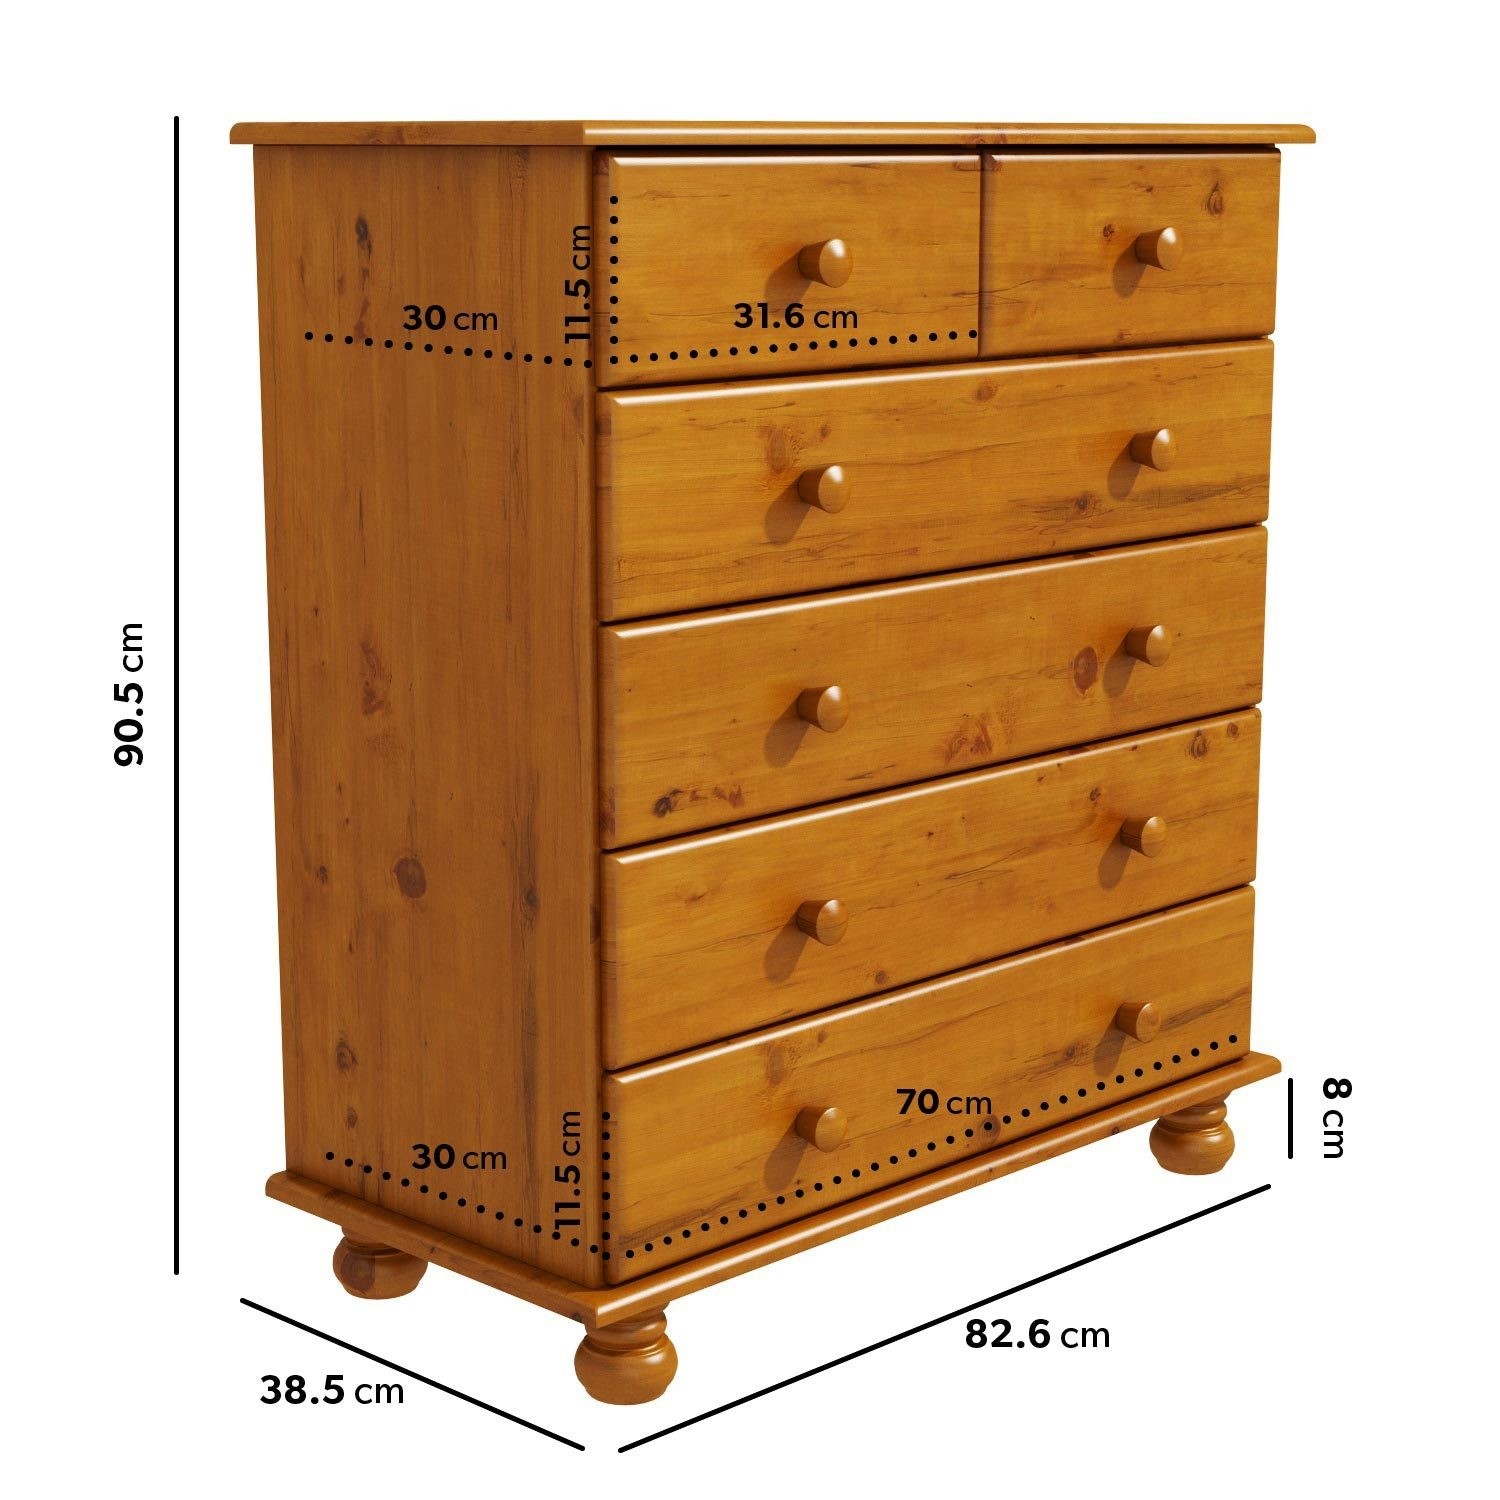 Read more about Pine chest of 6 drawers hamilton